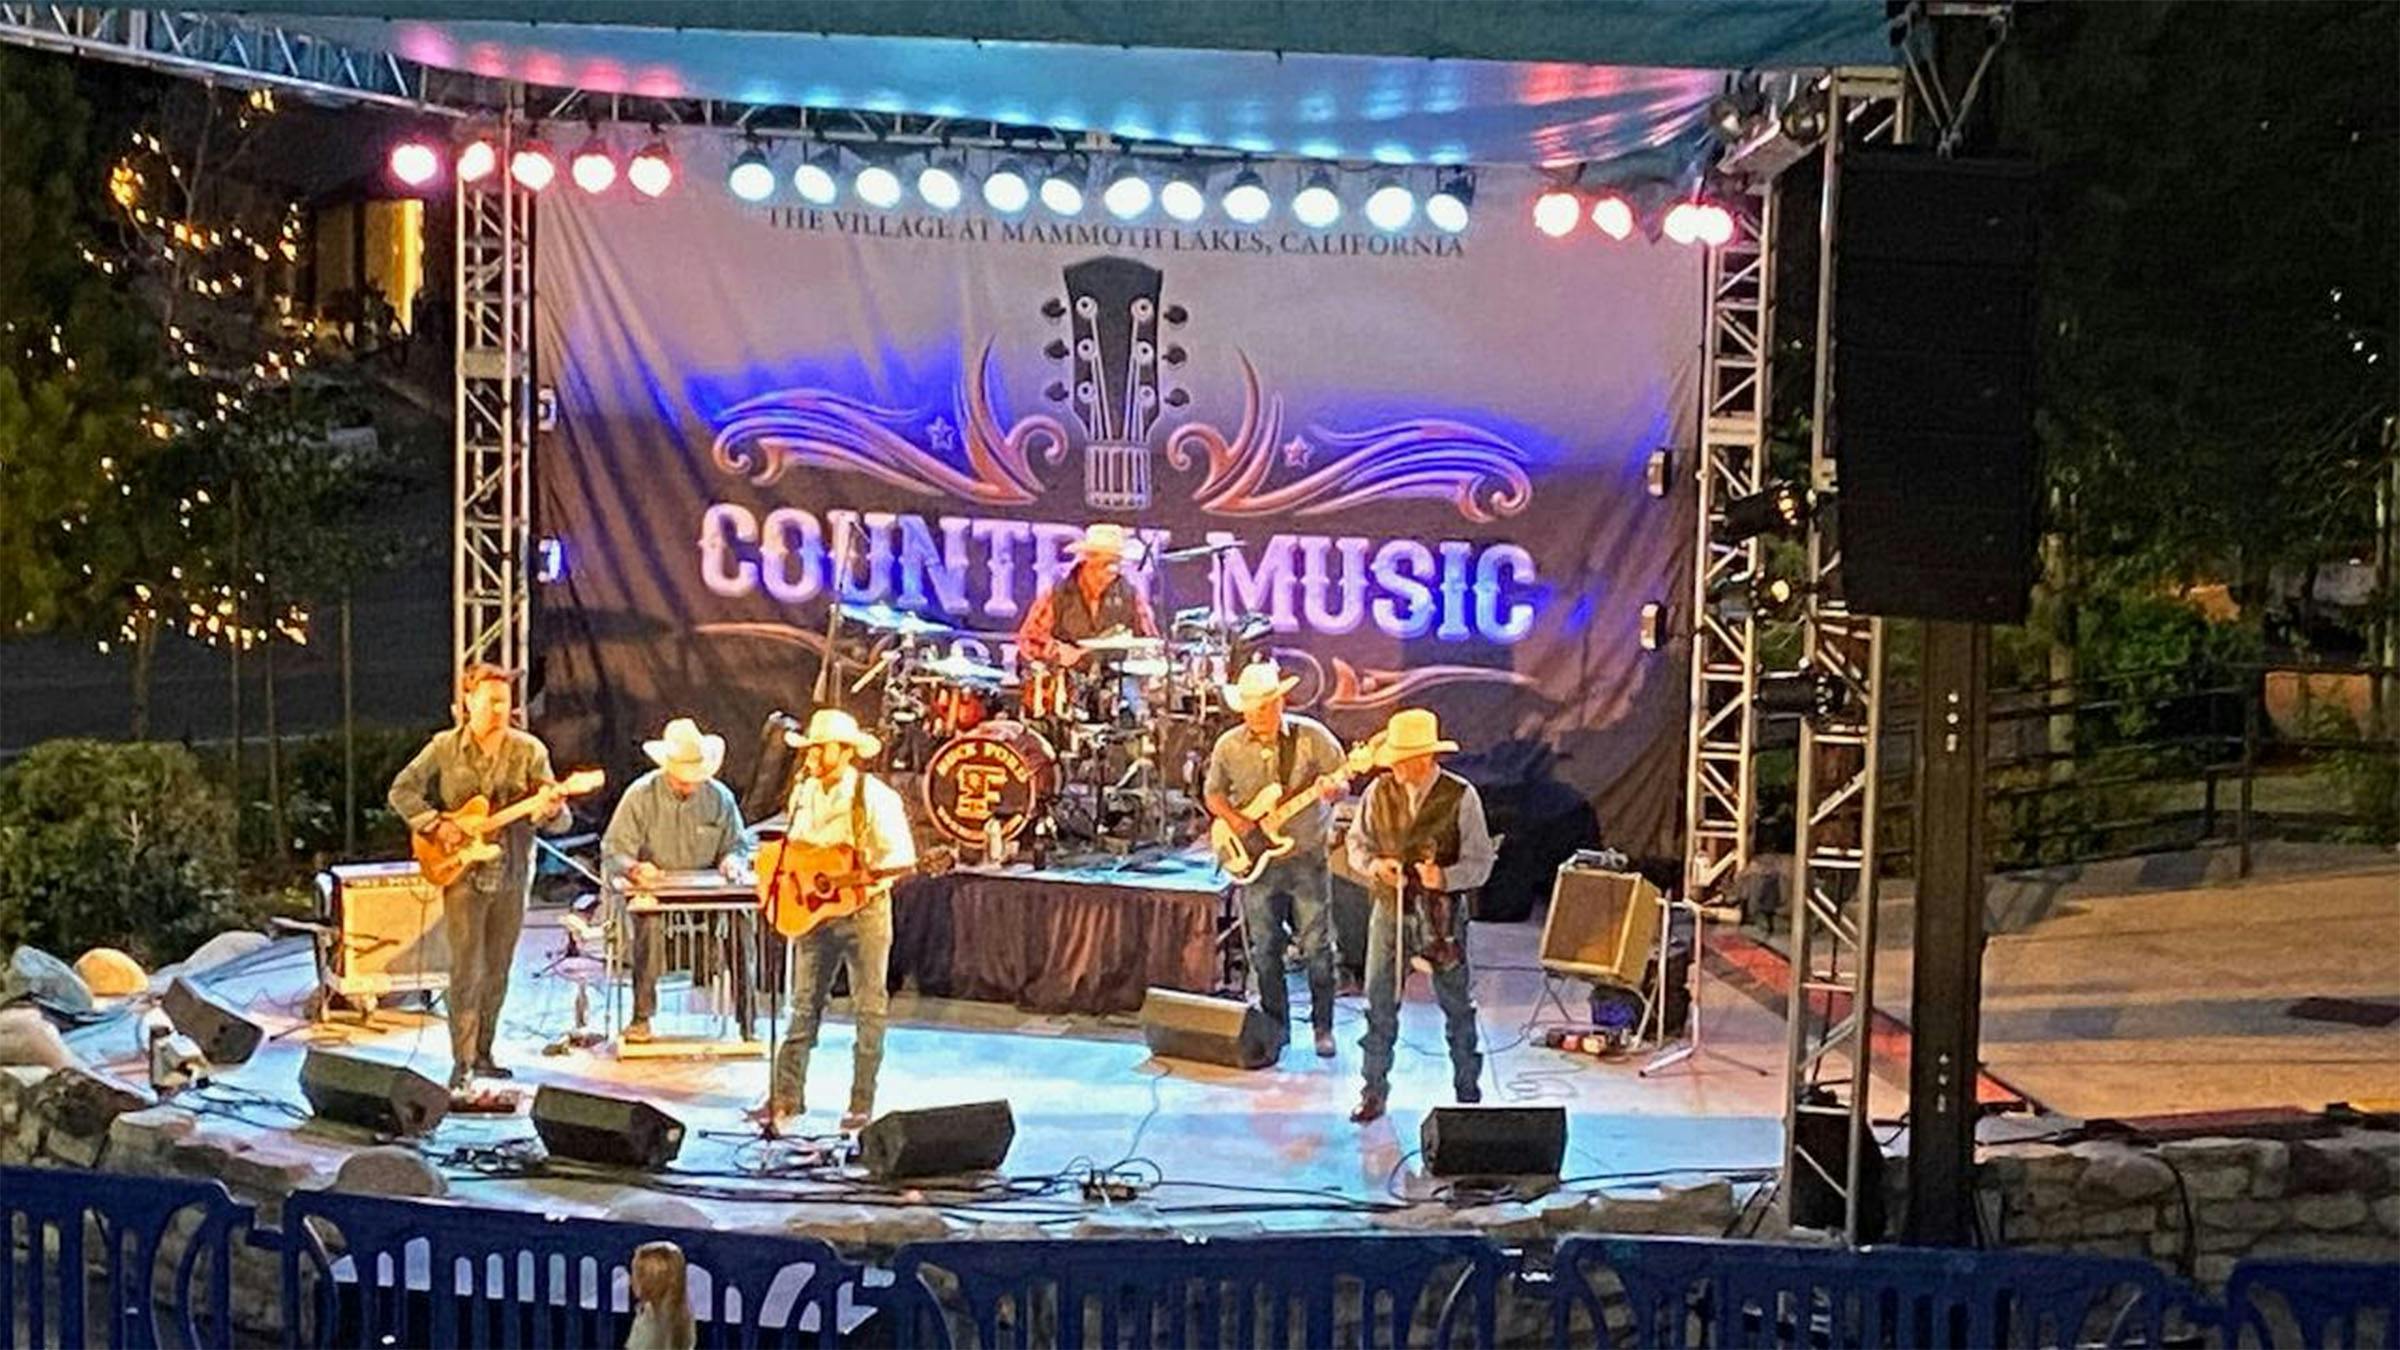 Band playing live country music on stage at The Village at Mammoth